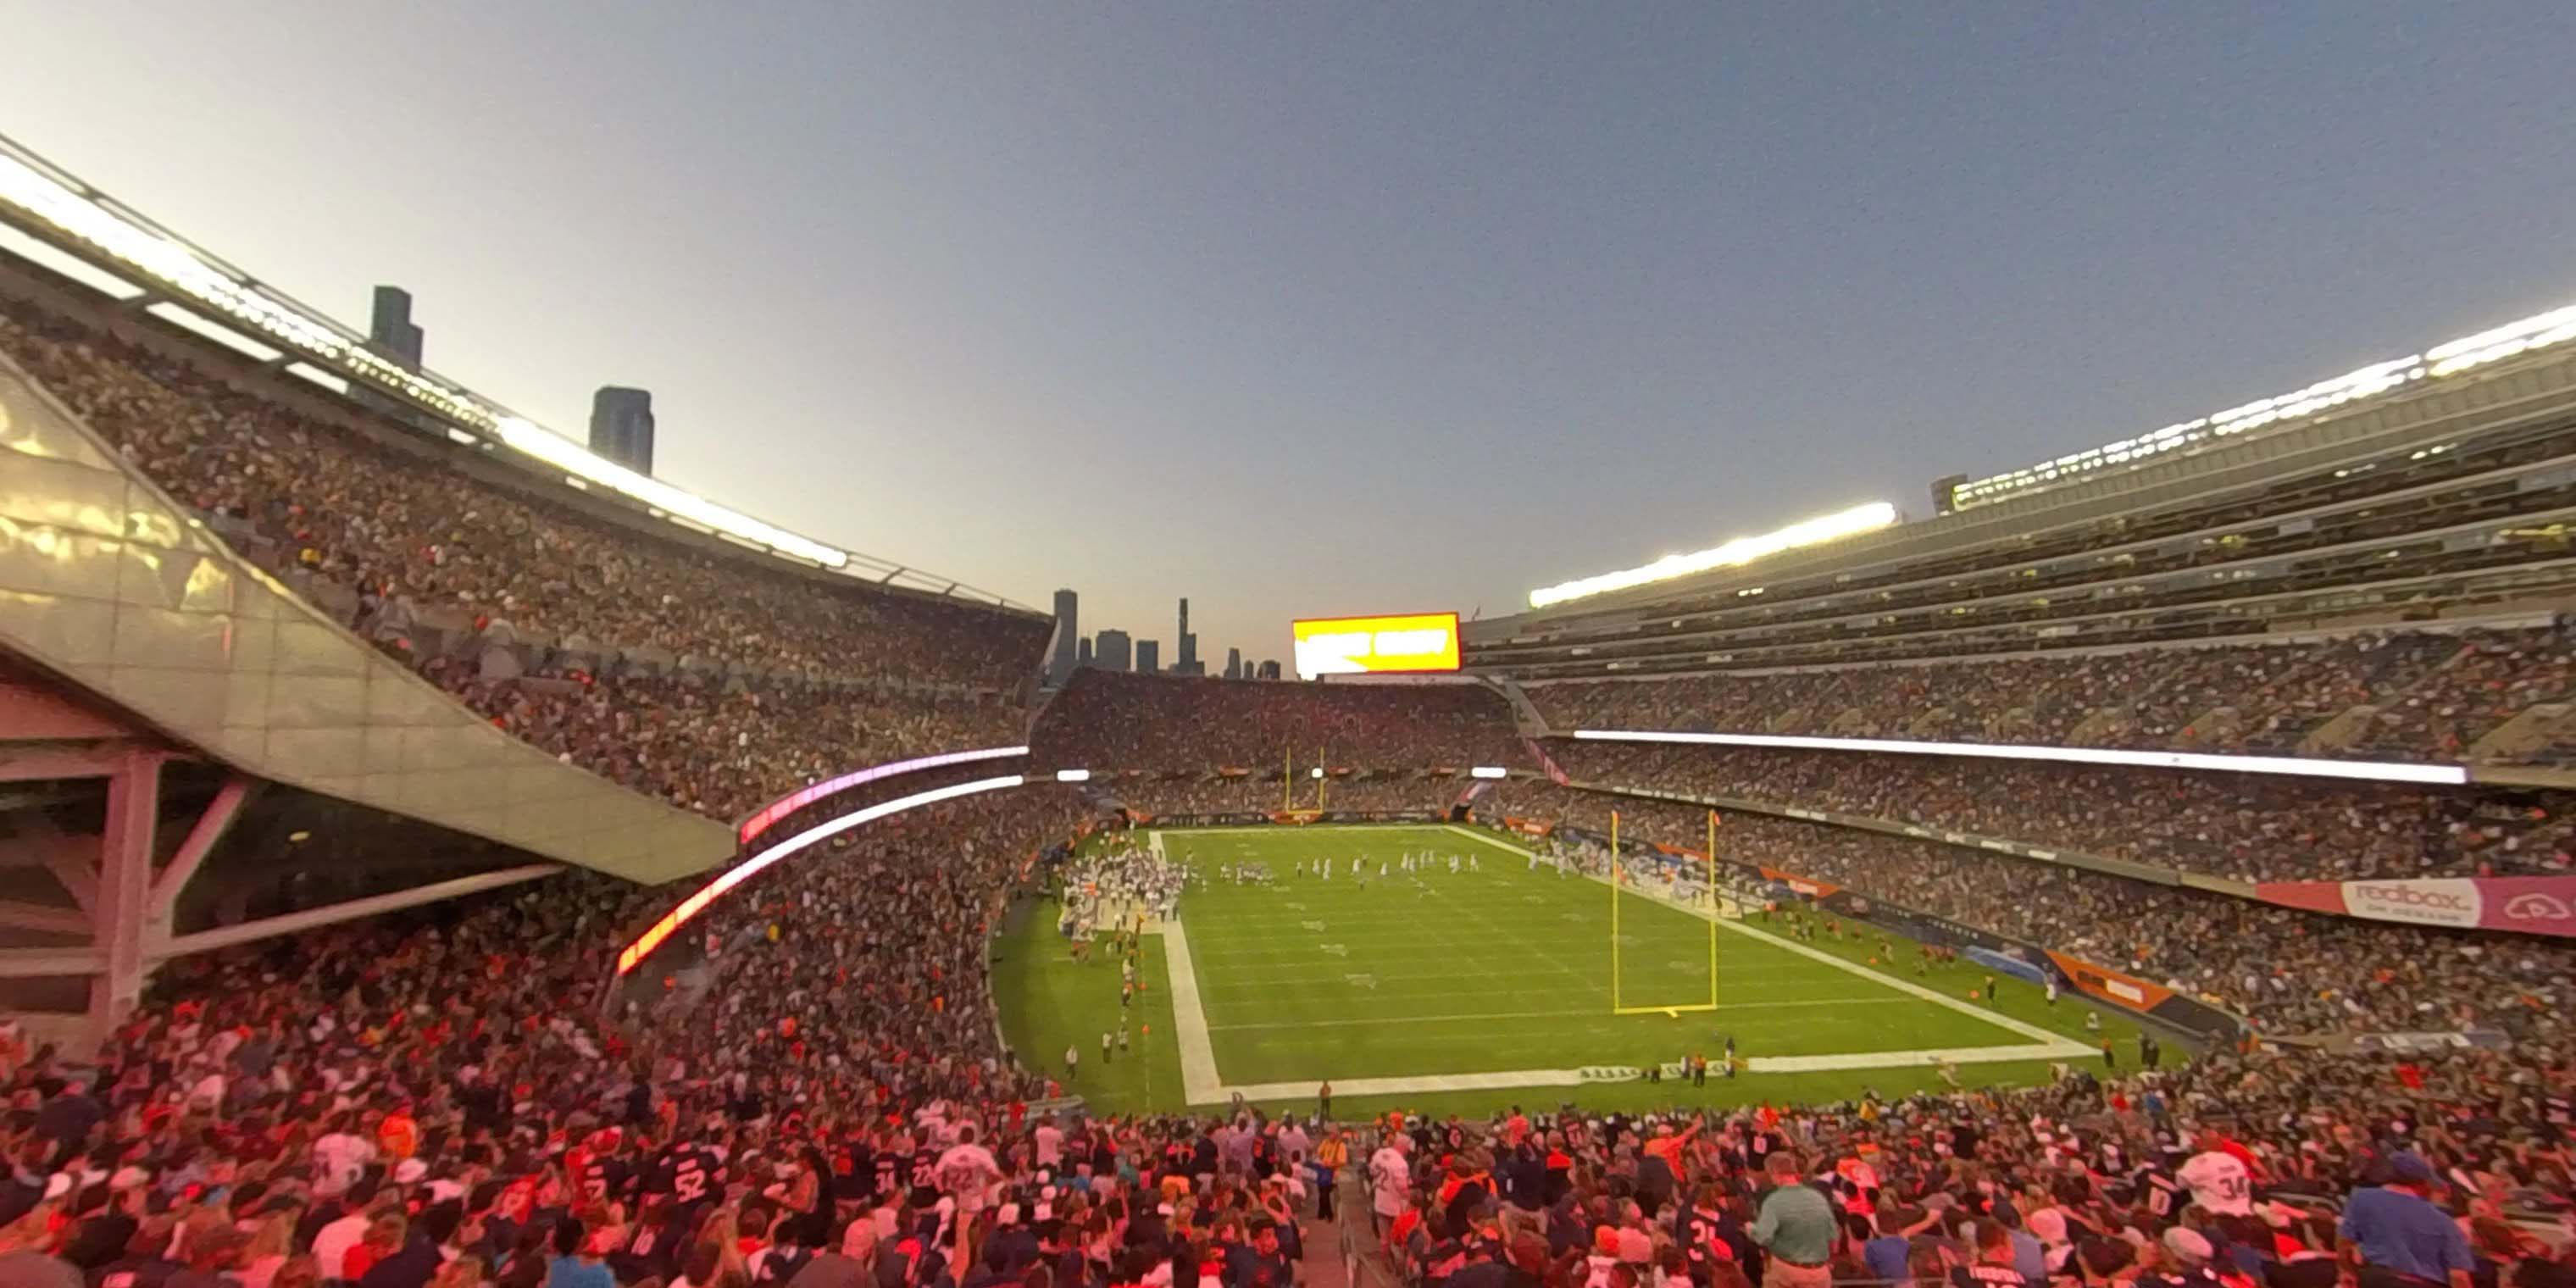 section 324 panoramic seat view  for football - soldier field